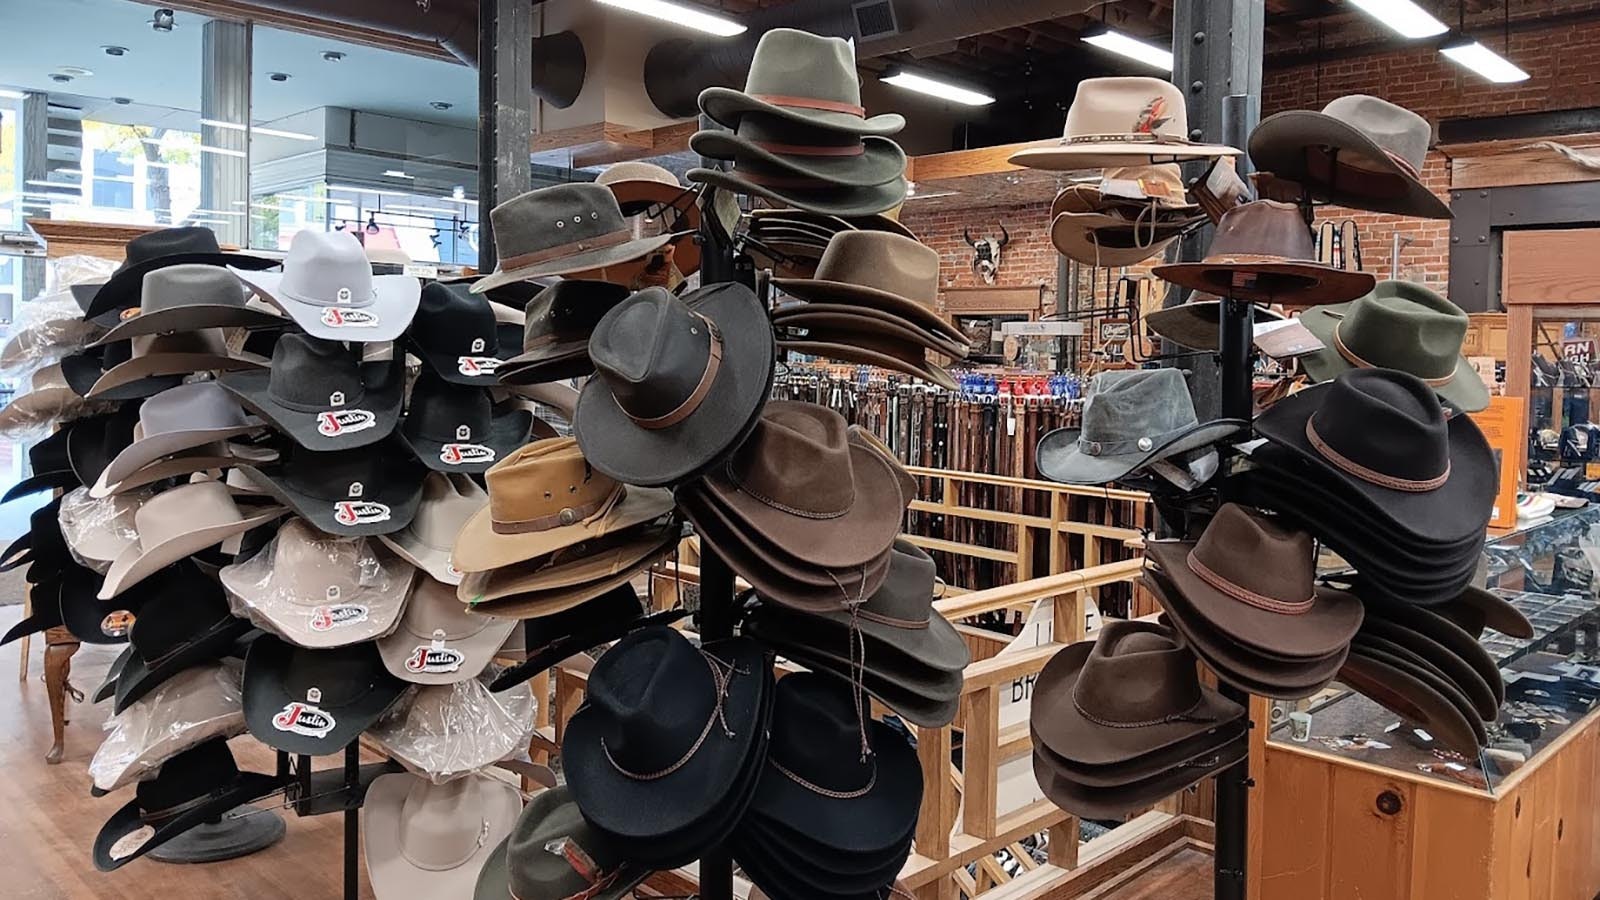 The giant cowboy hat rack calls to anyone who ever wanted to be a cowboy.